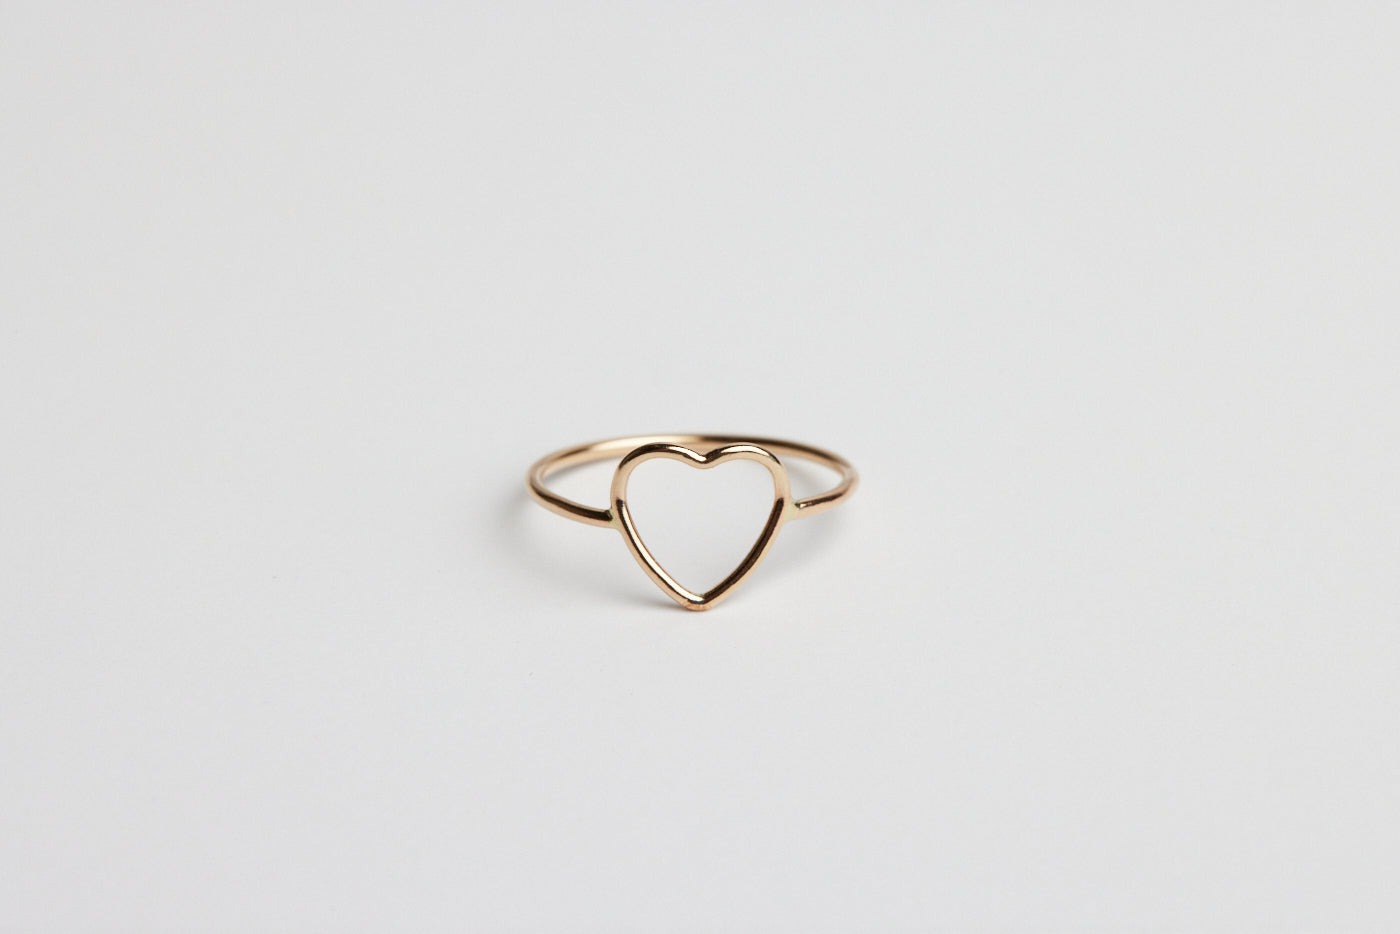 Able Valentine's Heart Ring